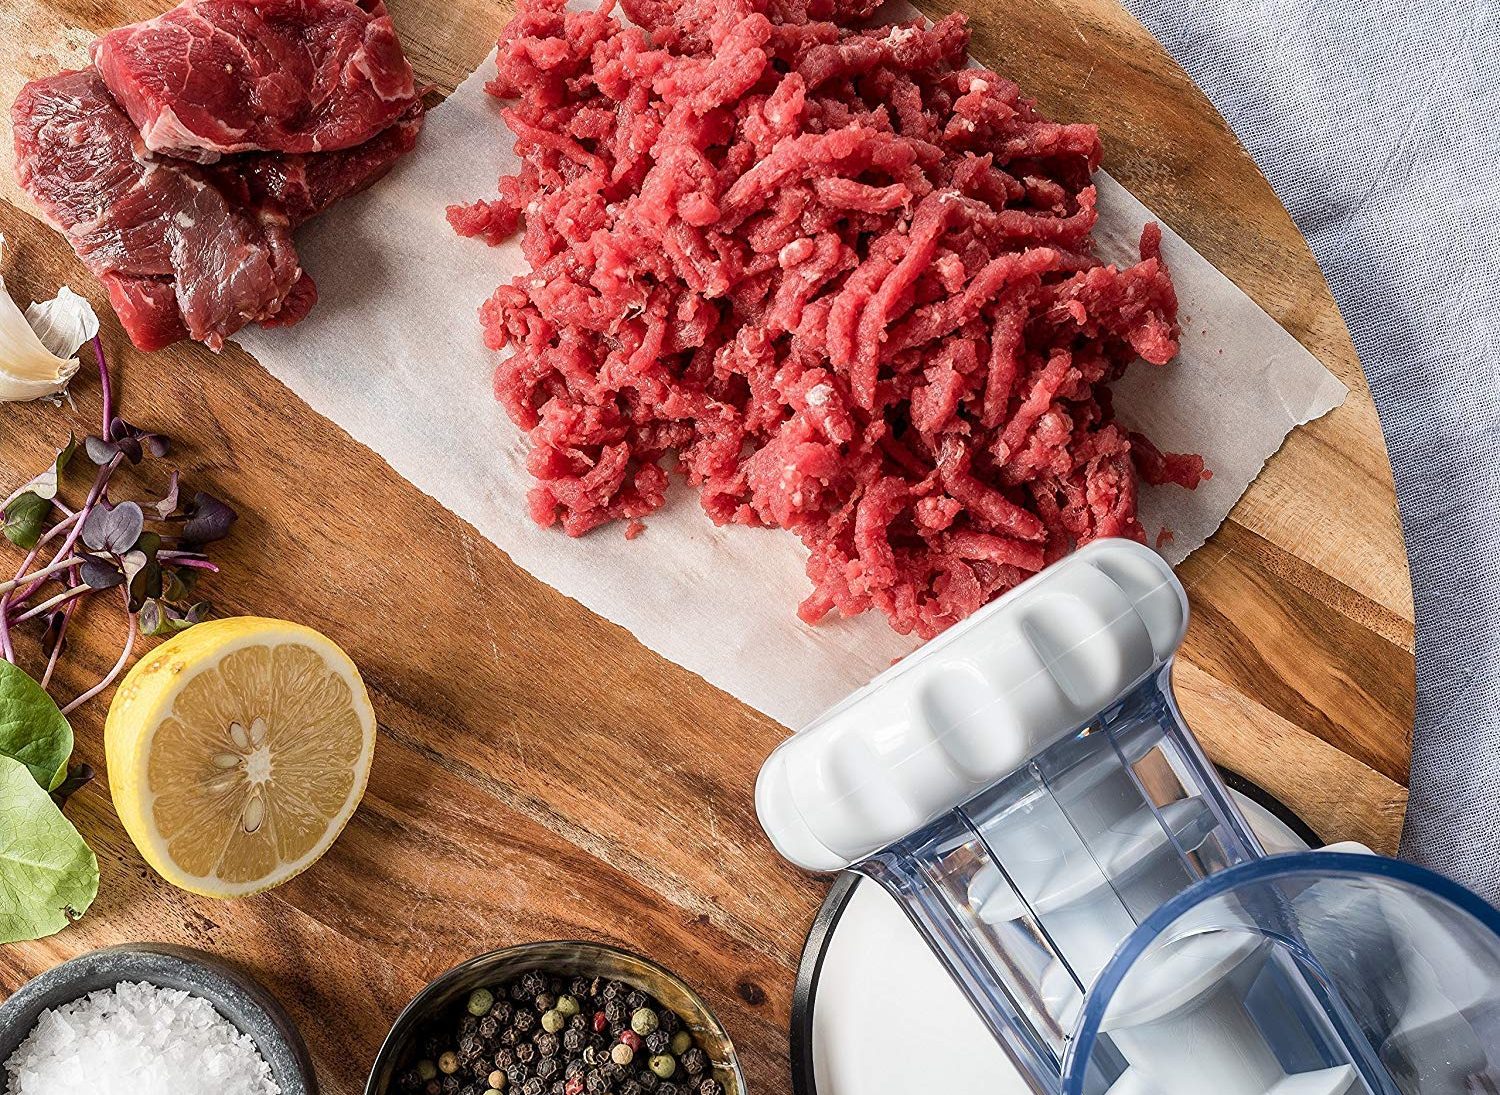 6 Best Meat Grinders — Take Your Food Quality under Control! (Winter 2022)